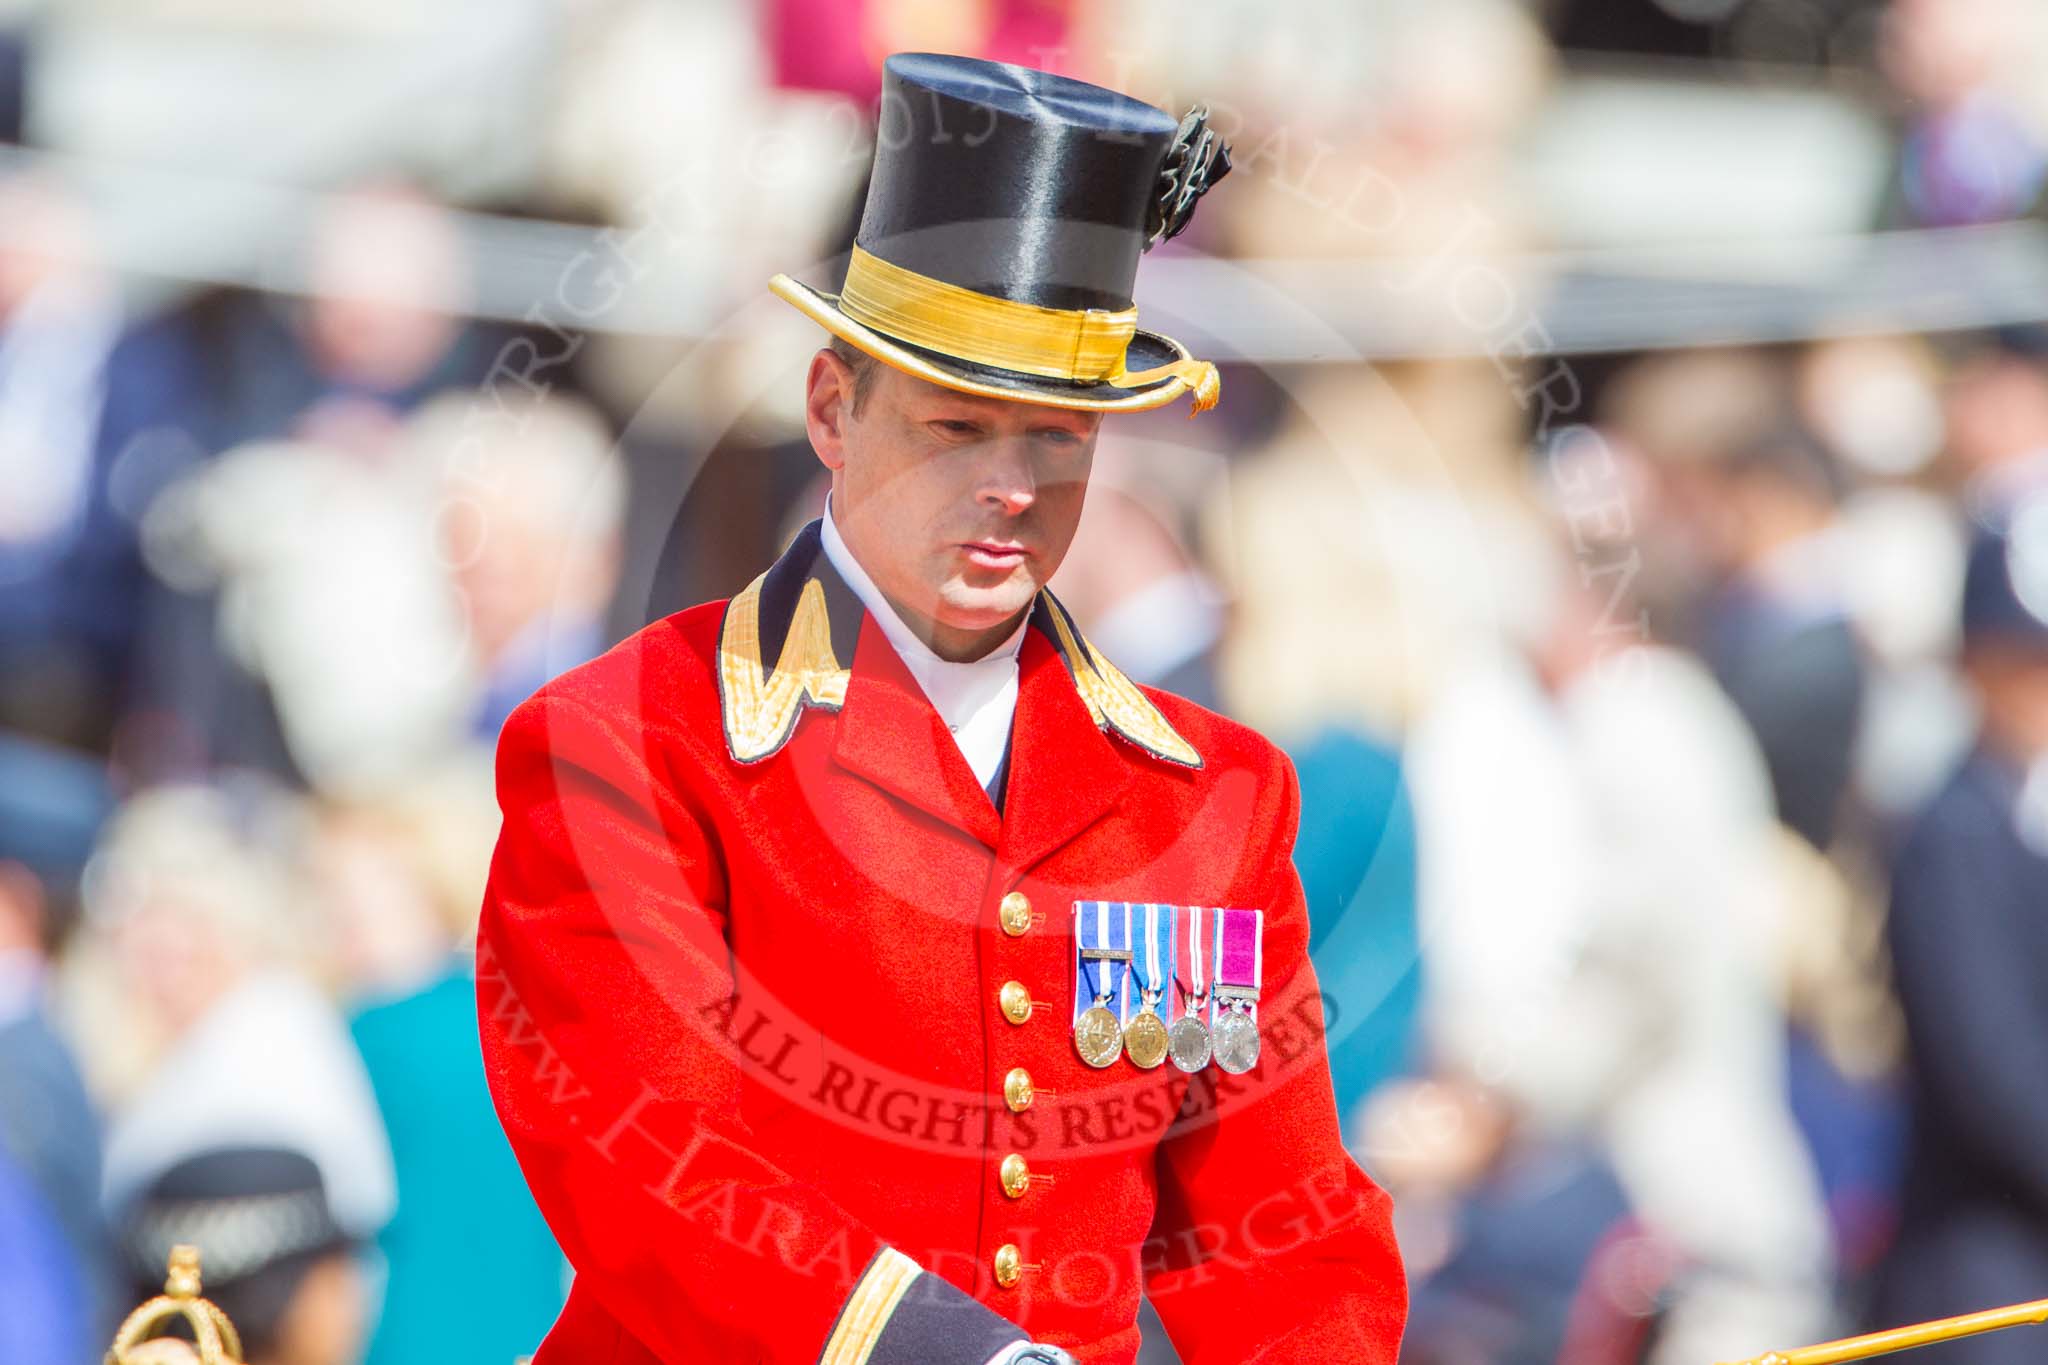 Trooping the Colour 2013: Mark Hargreaves, Head Coachman, in charge of the Glass Coach carrying HM The Queen..
Horse Guards Parade, Westminster,
London SW1,

United Kingdom,
on 15 June 2013 at 10:59, image #288